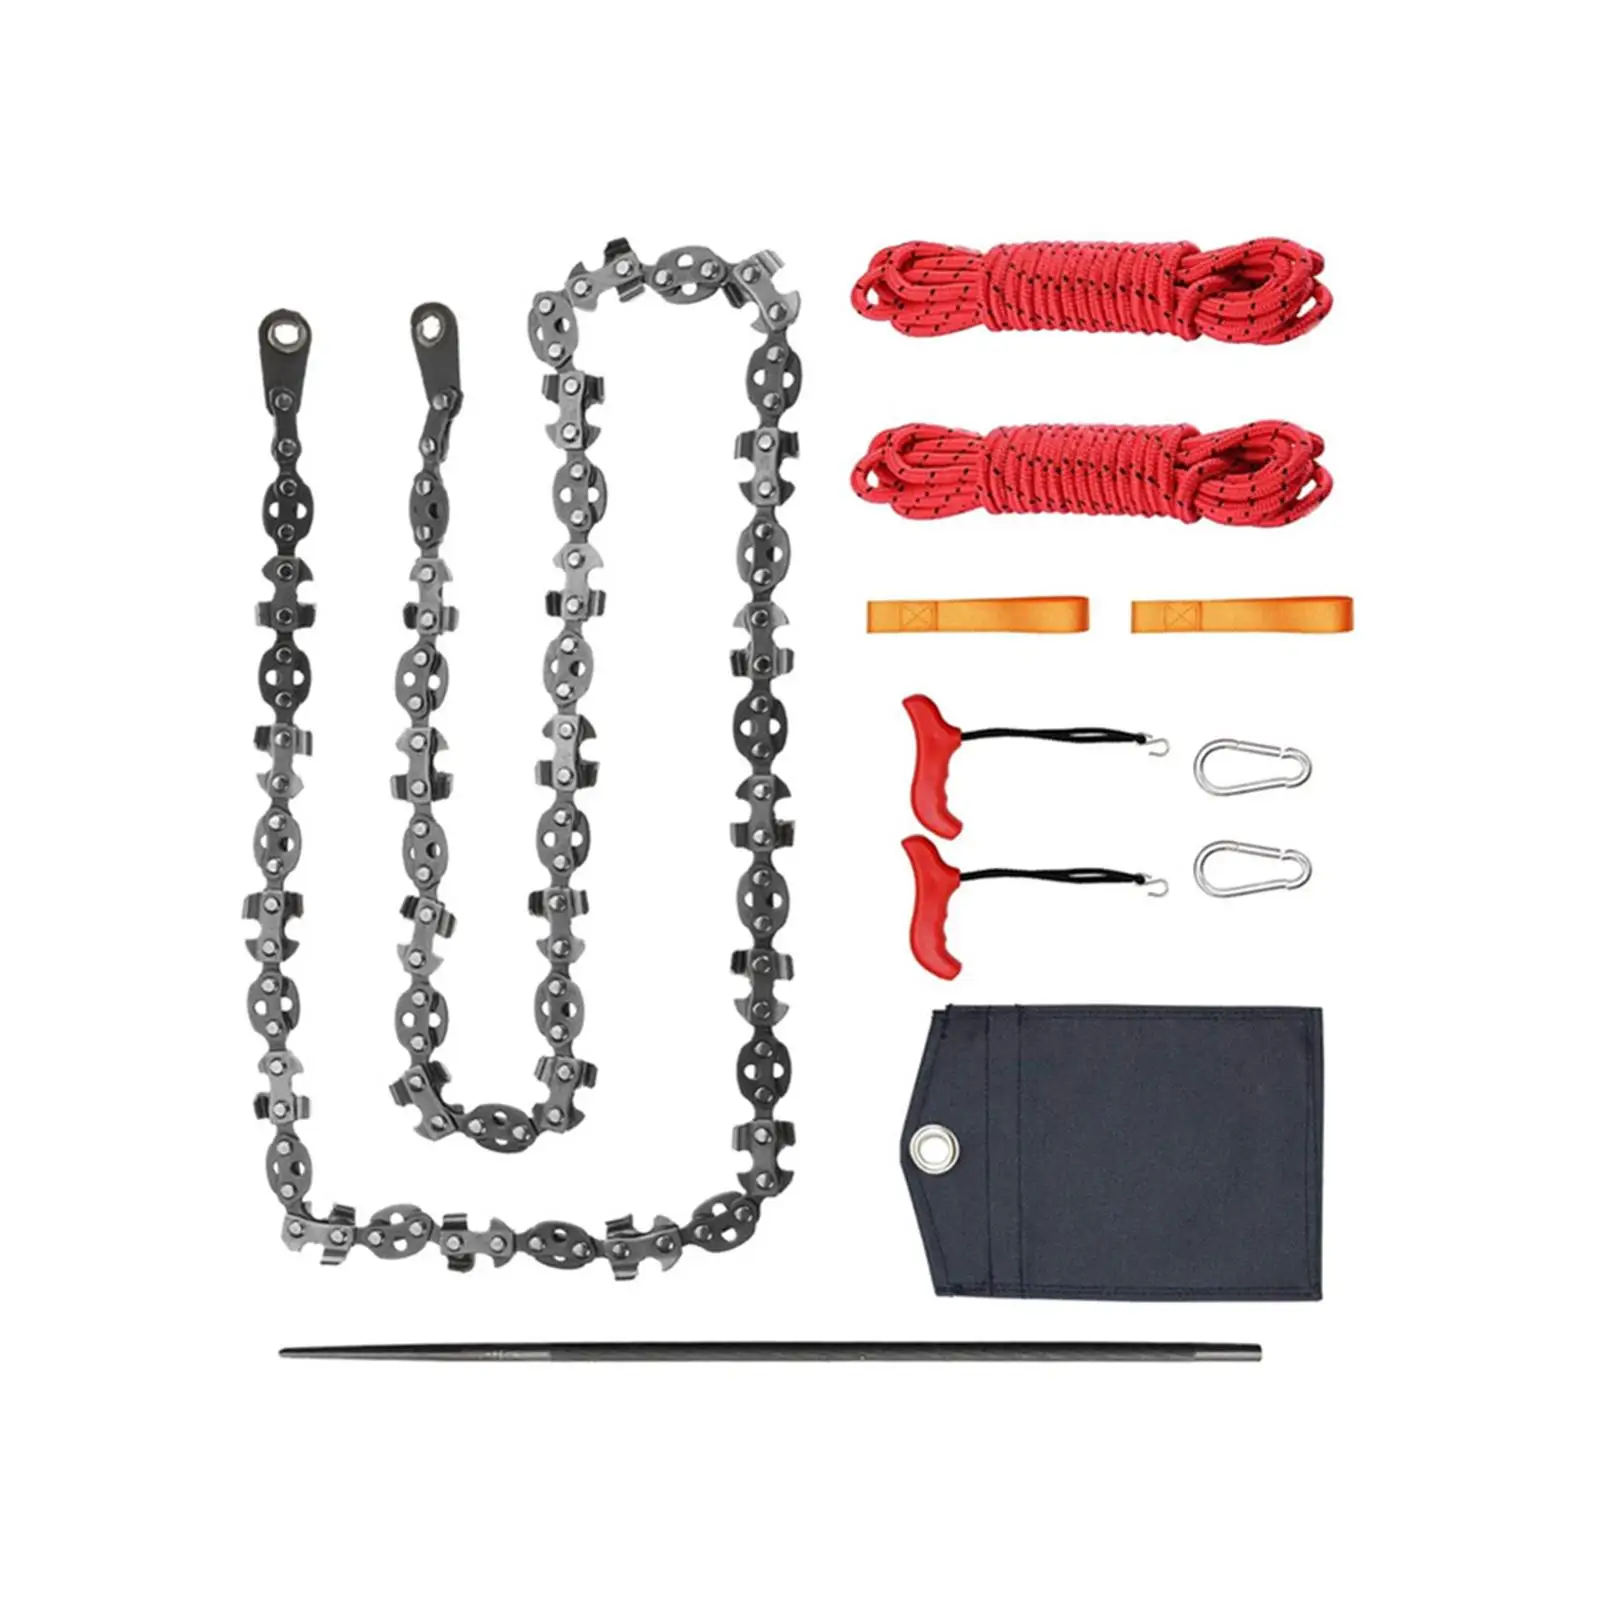 Pocket Saw Double Sides Blade Camping Saw Hand Rope Chain Saw Emergency Saw for Gardening Hiking Camping Emergency Outdoor